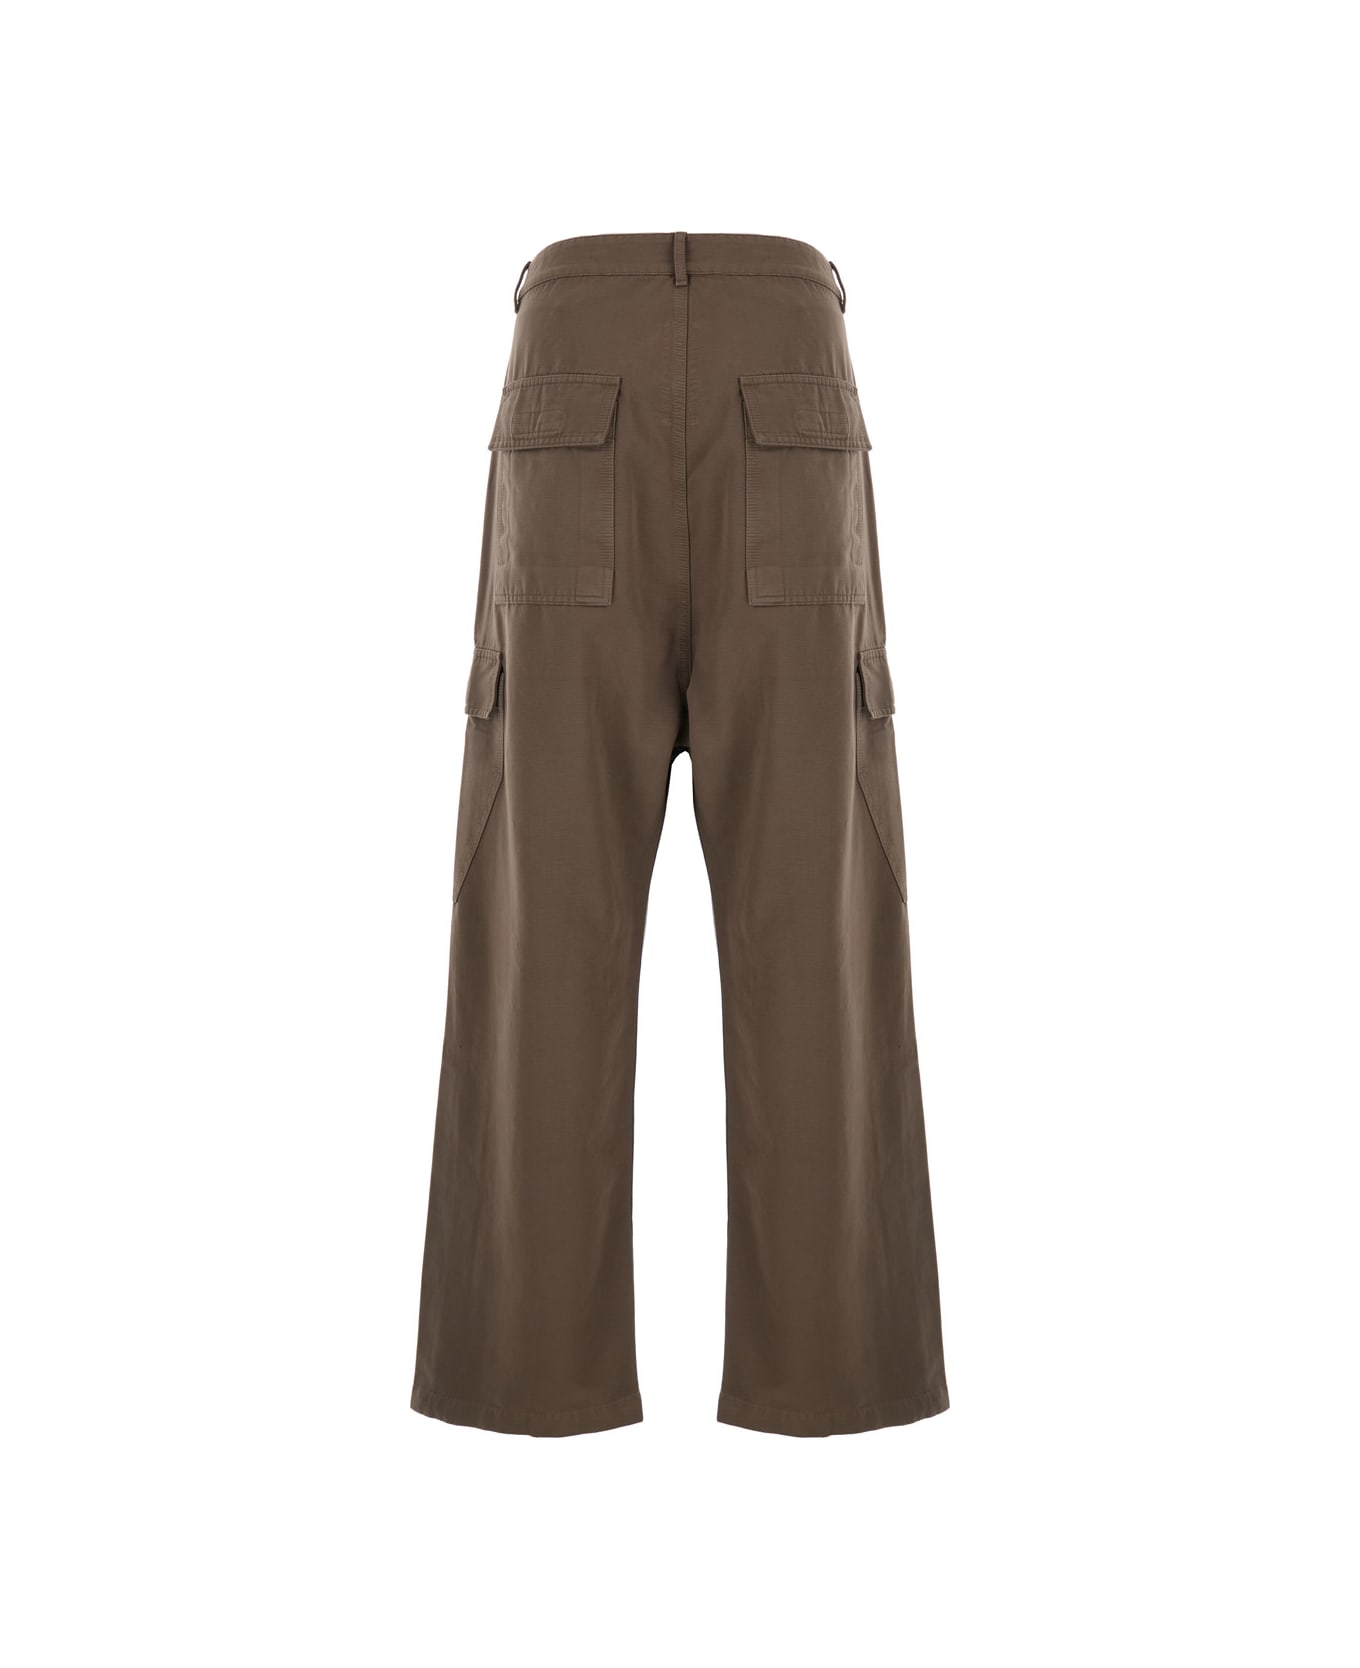 DRKSHDW Cotton Twill Cargo Trousers - Brown ボトムス